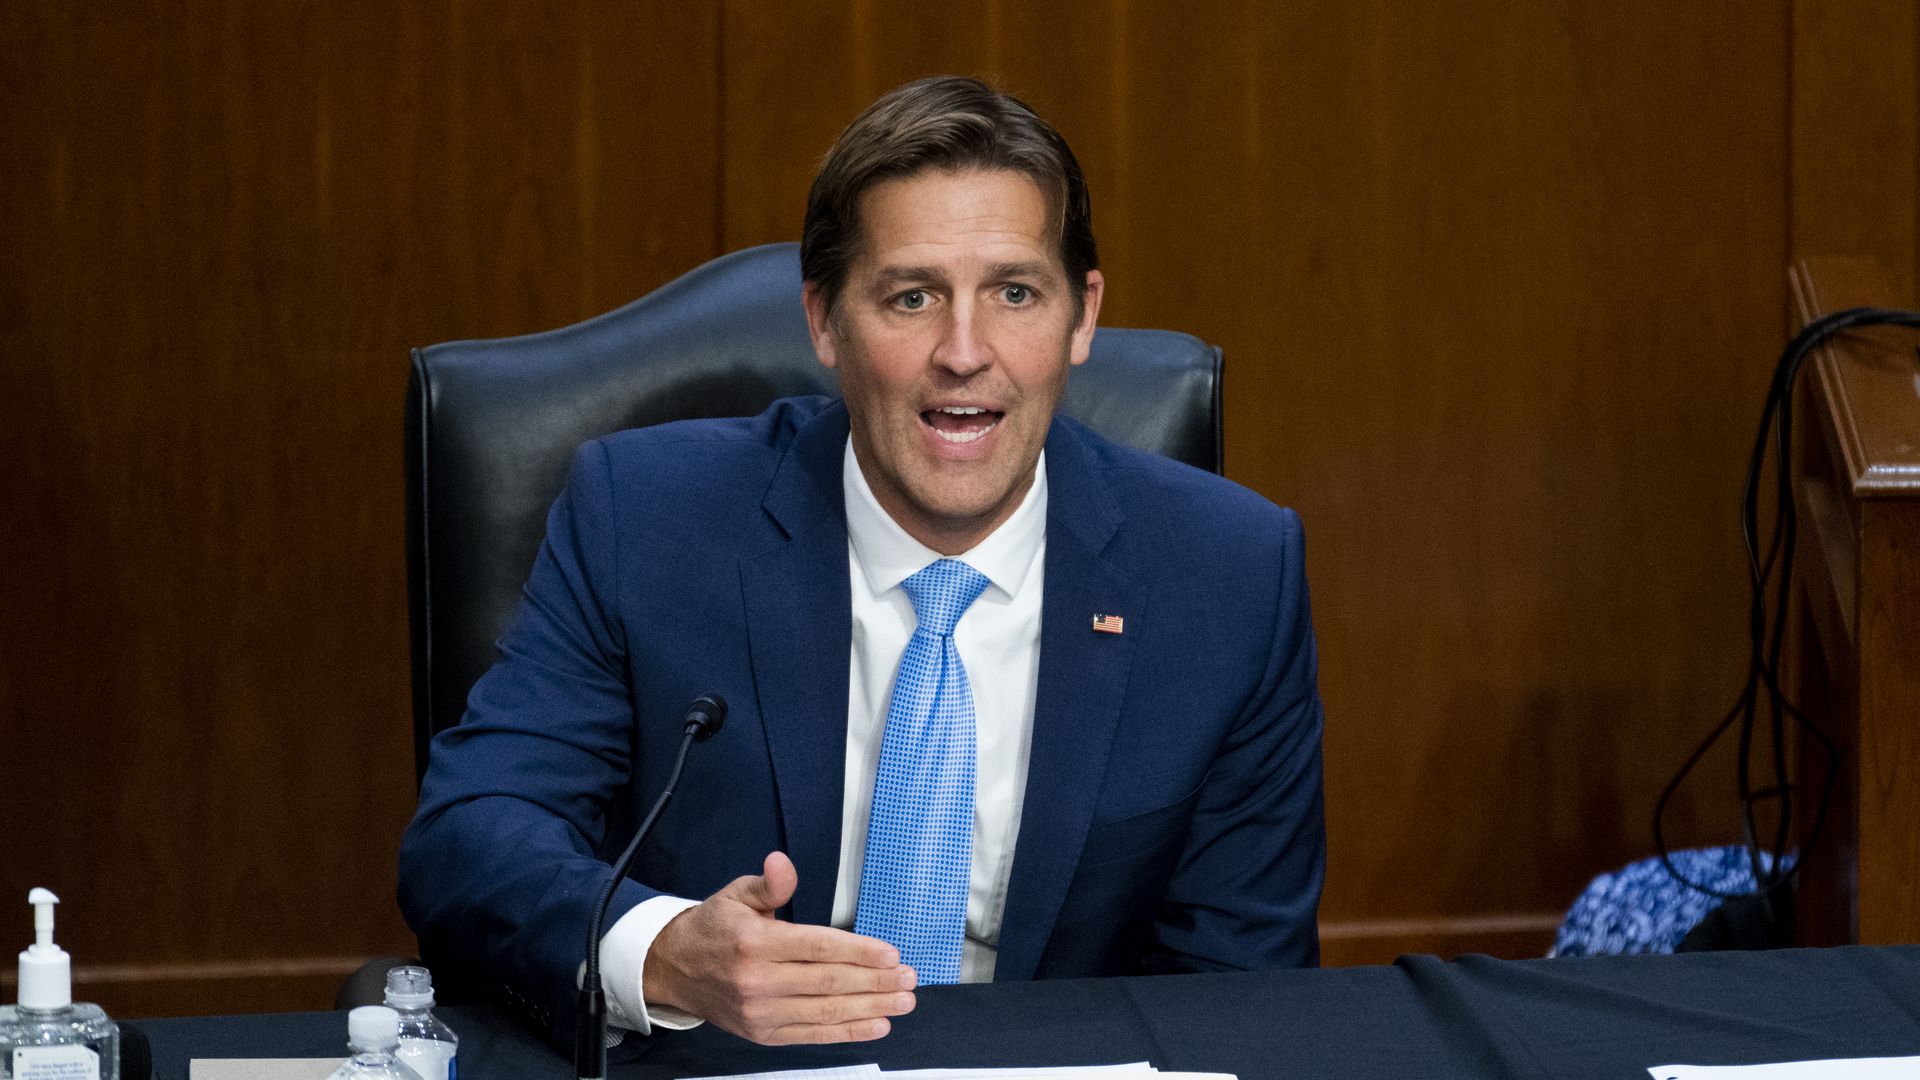 Sen. Ben Sasse, R-Neb., questions Judge Amy Coney Barrett, nominee to be Assocoiate Justice of the Supreme Court, during her confirmation hearing in the Senate Judiciary Committee